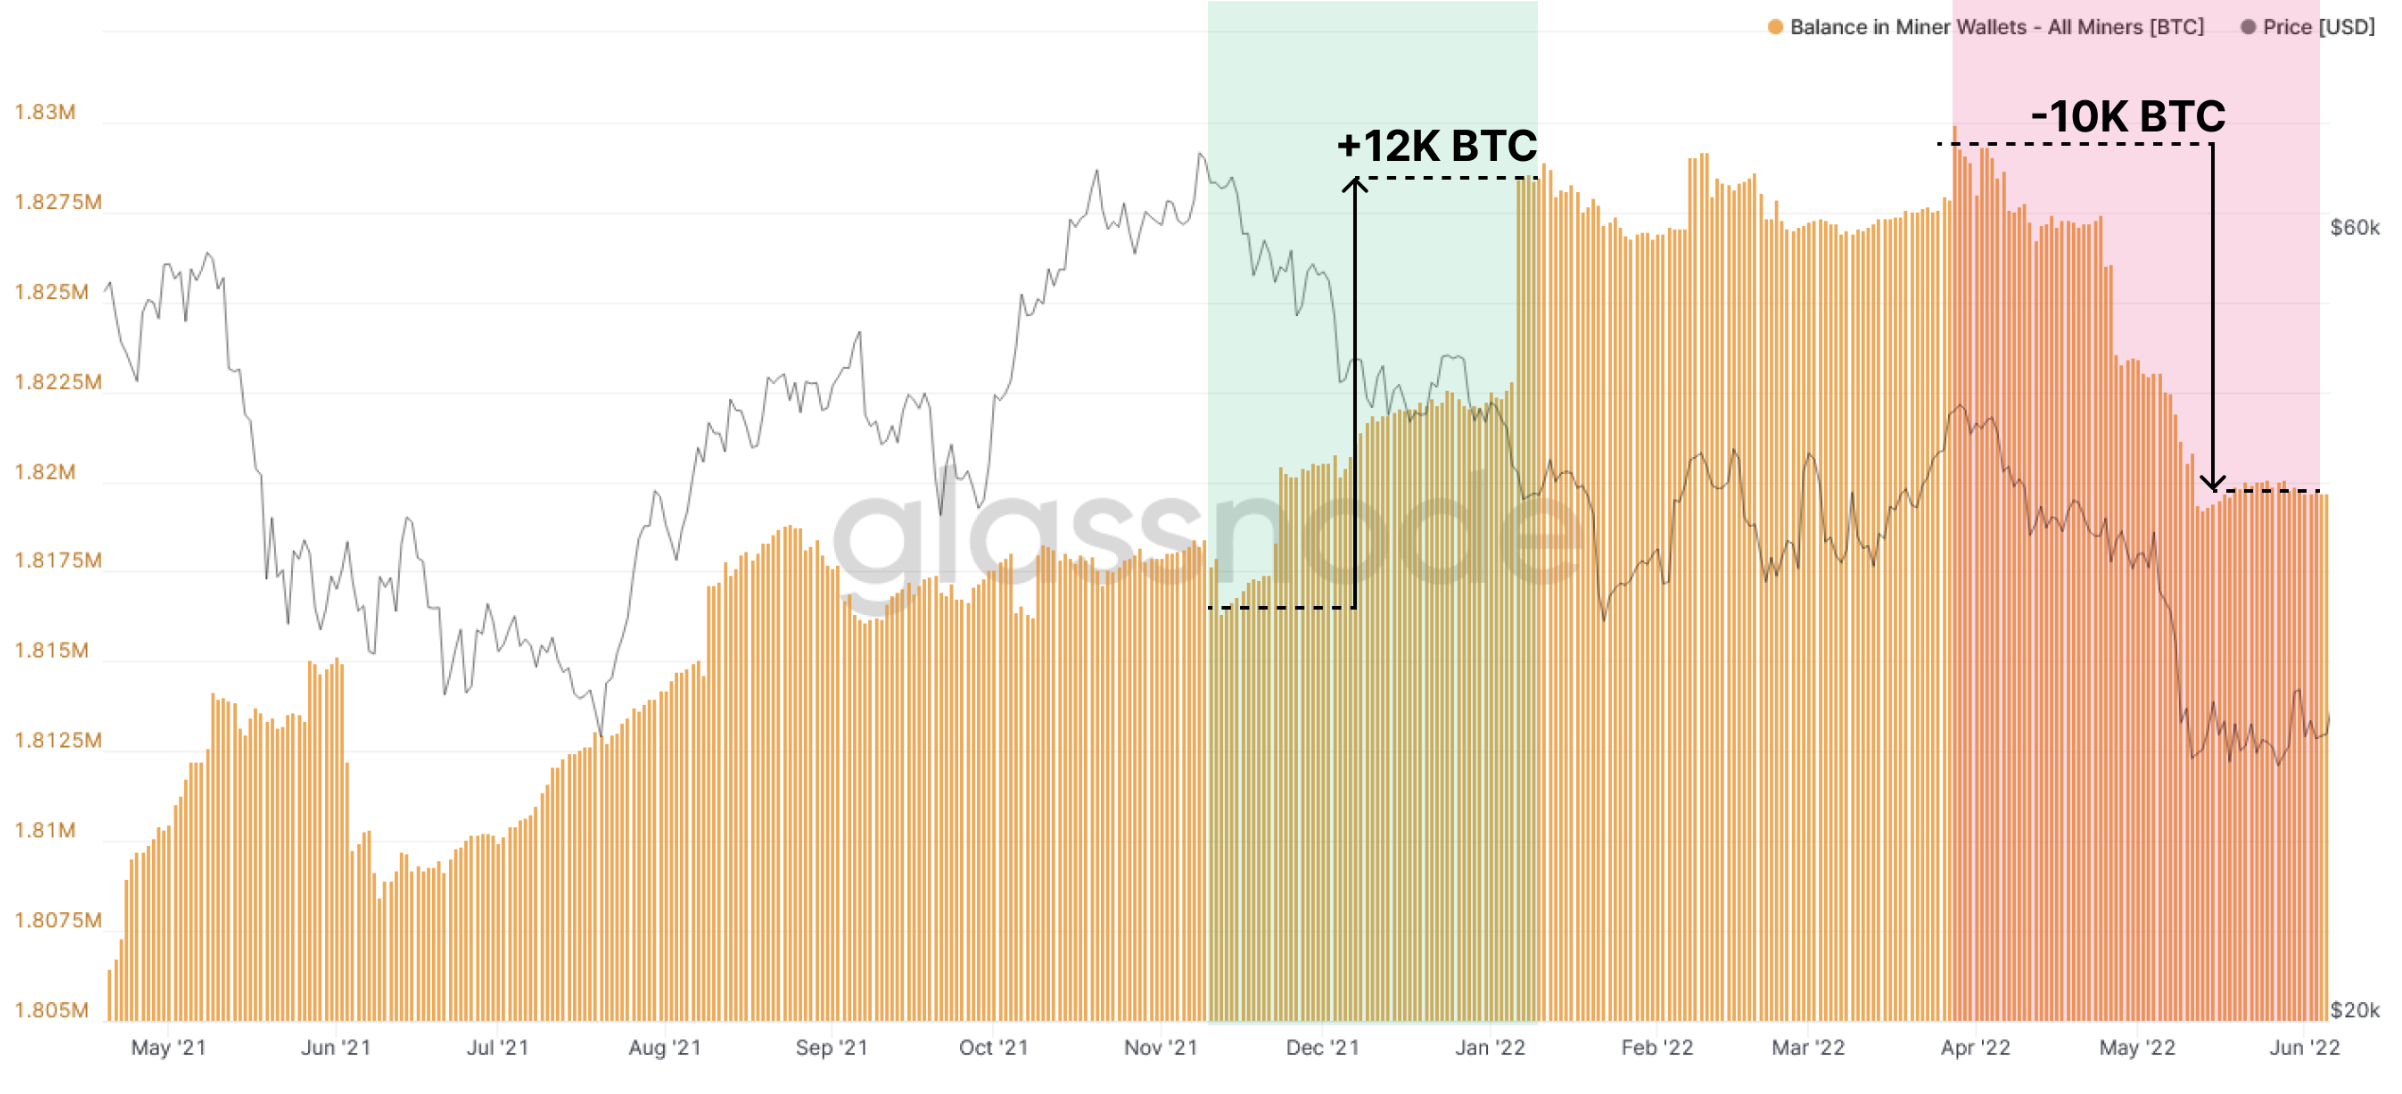 Bitcoin miners holdings, June 2022